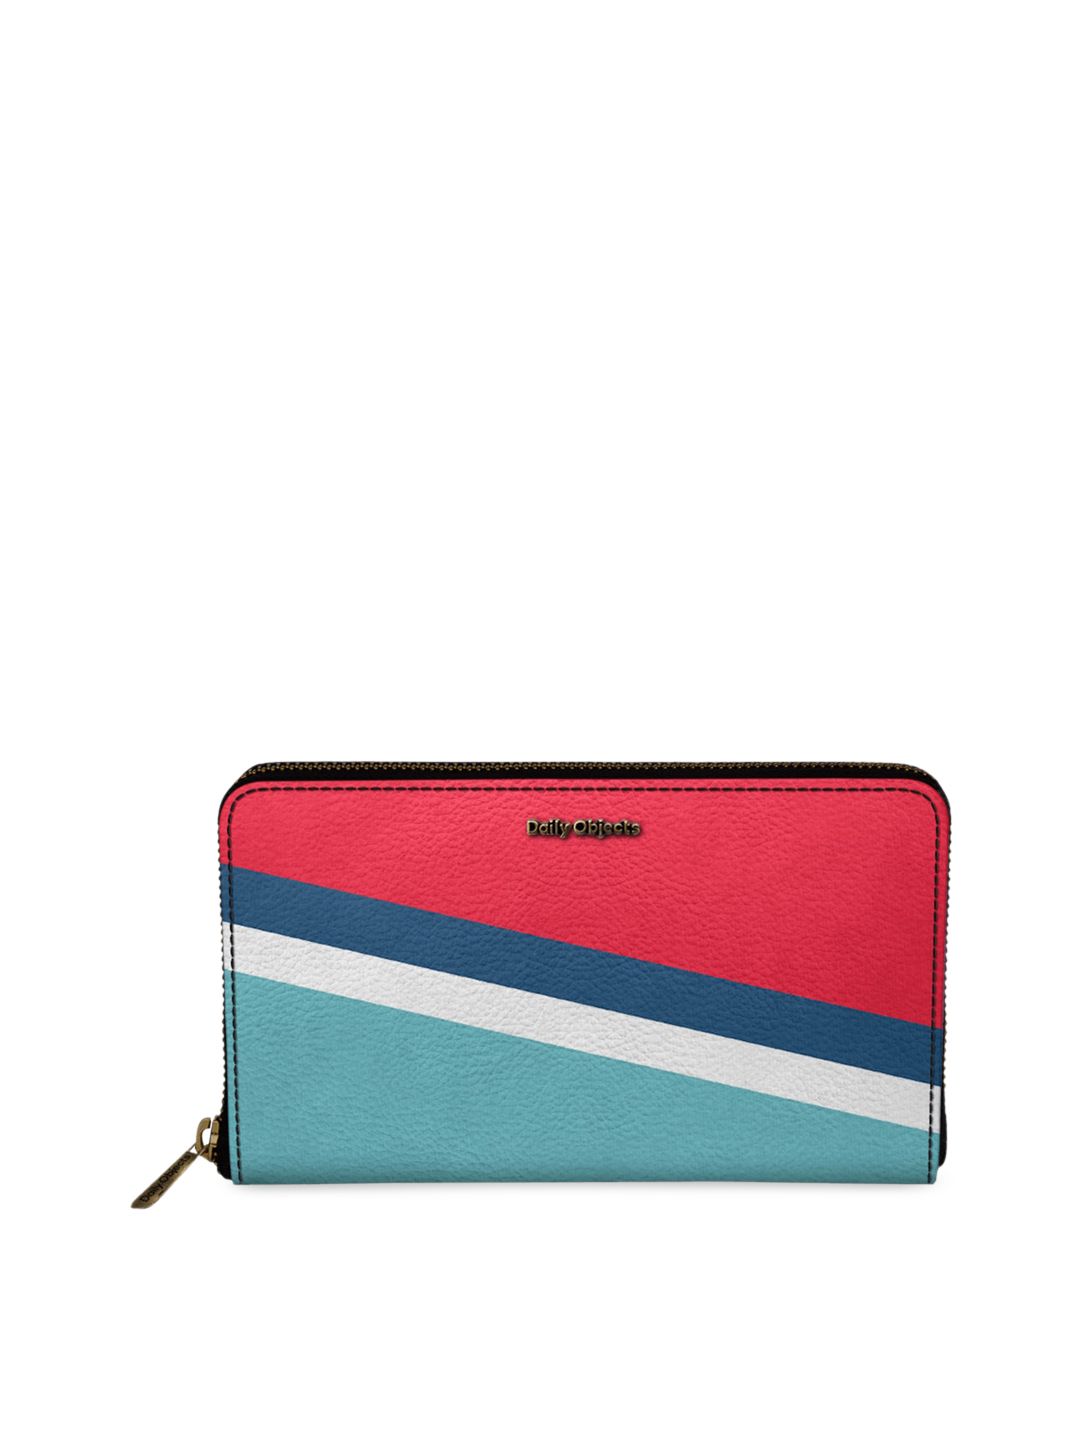 DailyObjects Women Red & Blue Colourblocked Zip Around Wallet Price in India